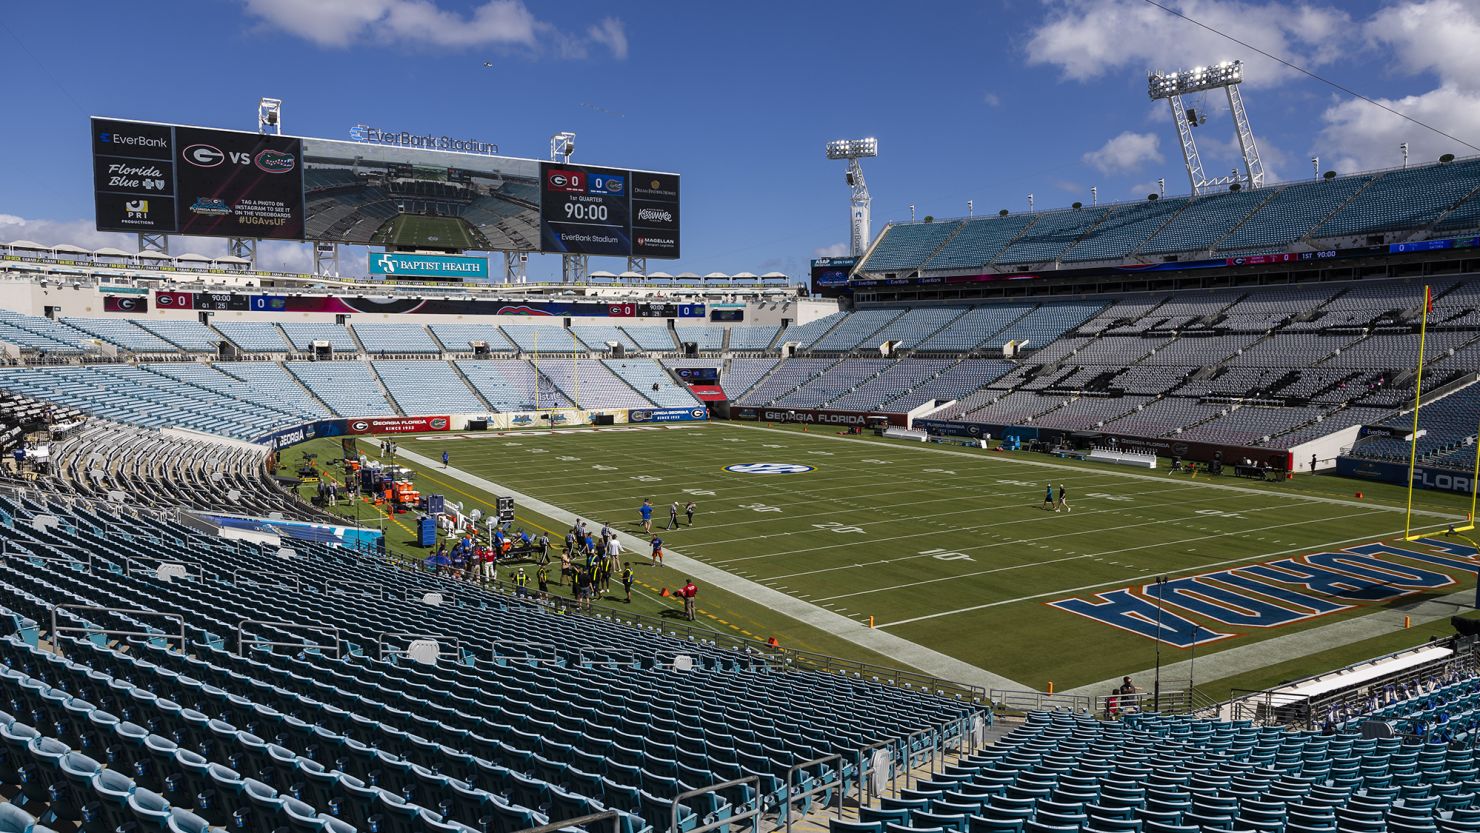 EverBank Stadium, the Jaguars' current home, will undergo significant renovations if their plans receive approval.